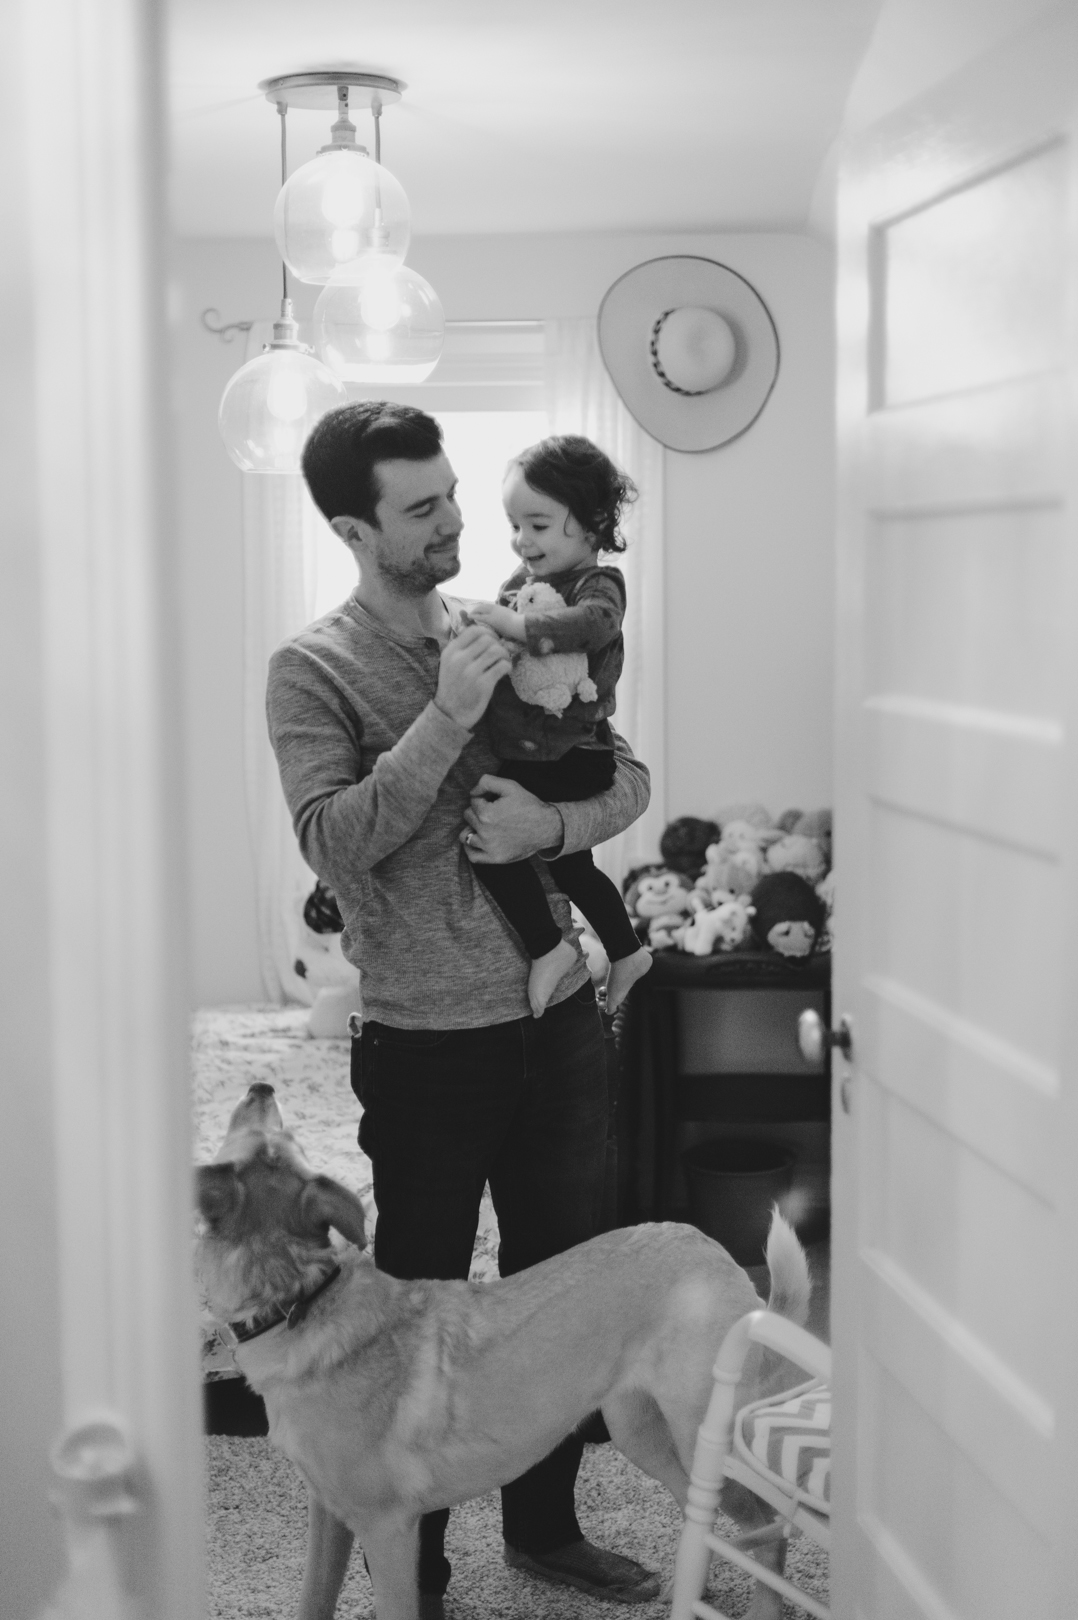 Dad, daughter and dog in child's bedroom on a Saturday morning. Photo by Ashley Notley Photography.